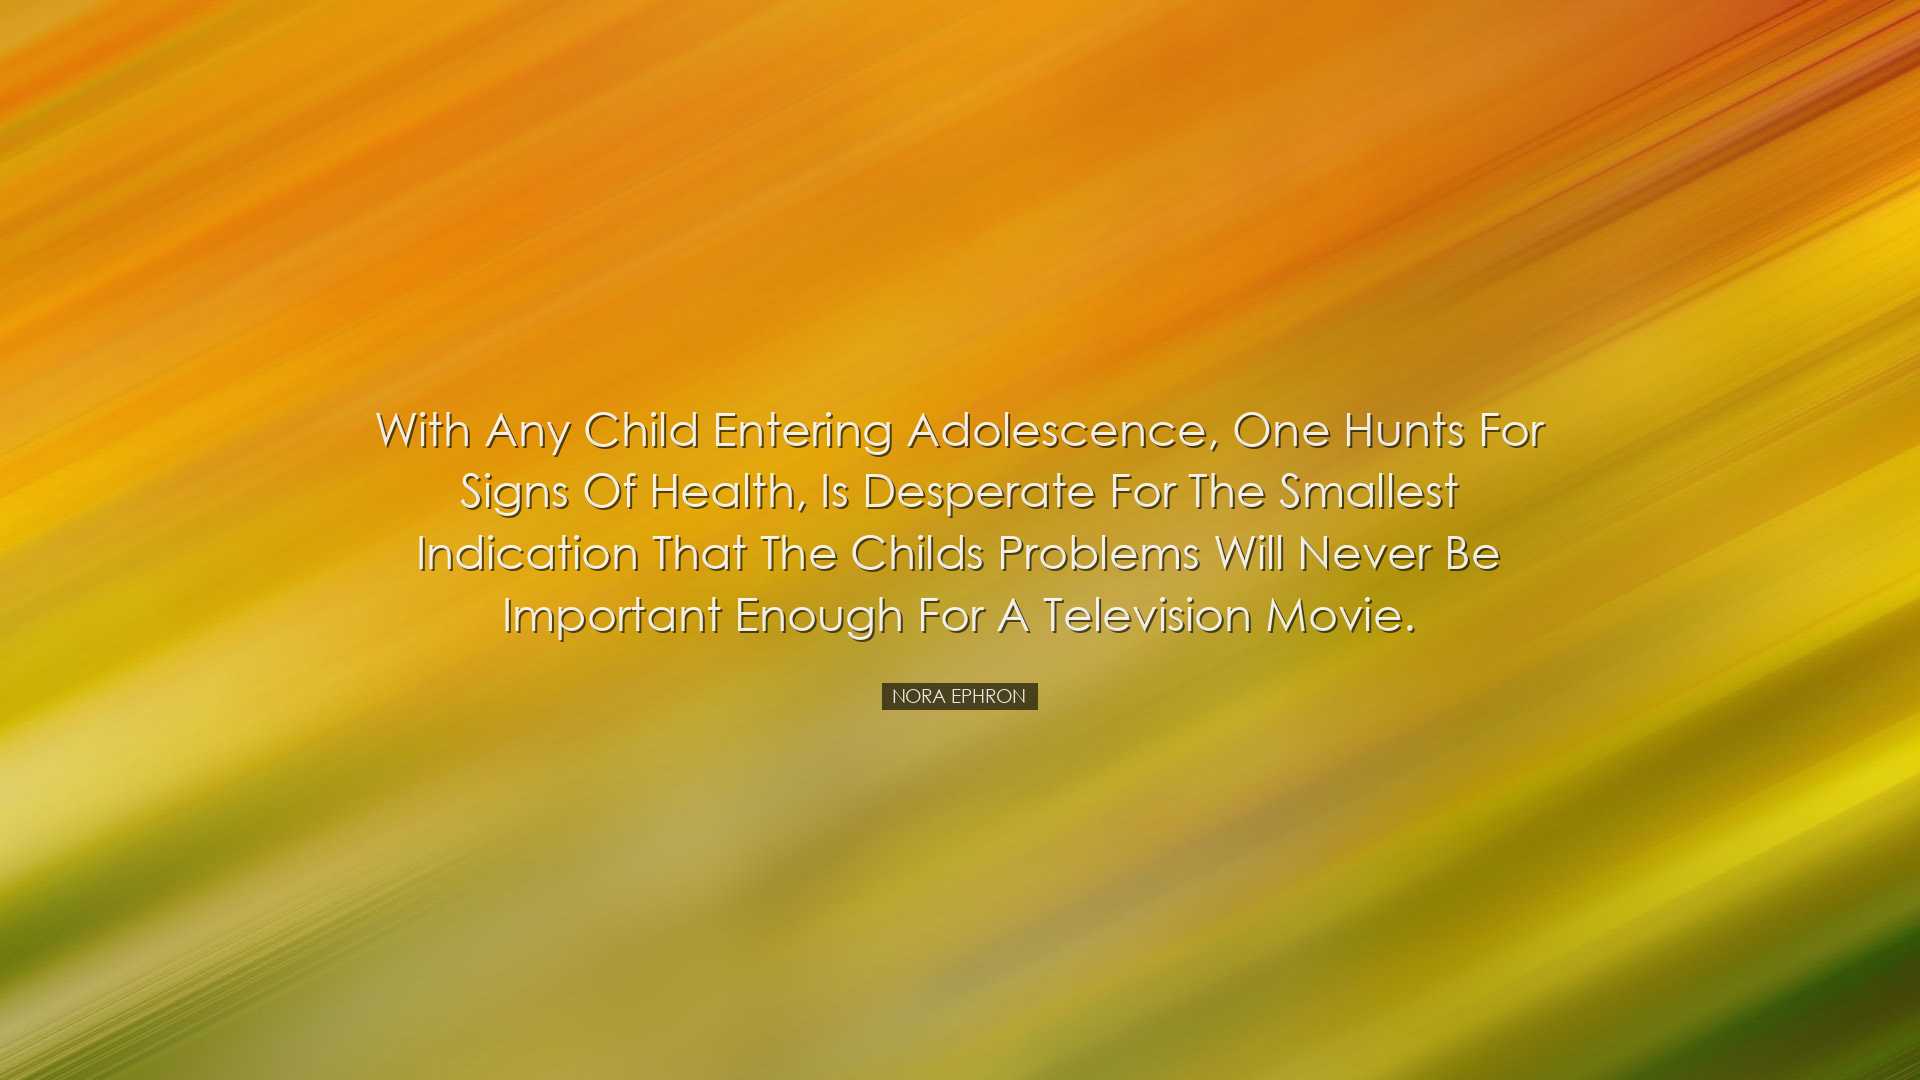 With any child entering adolescence, one hunts for signs of health